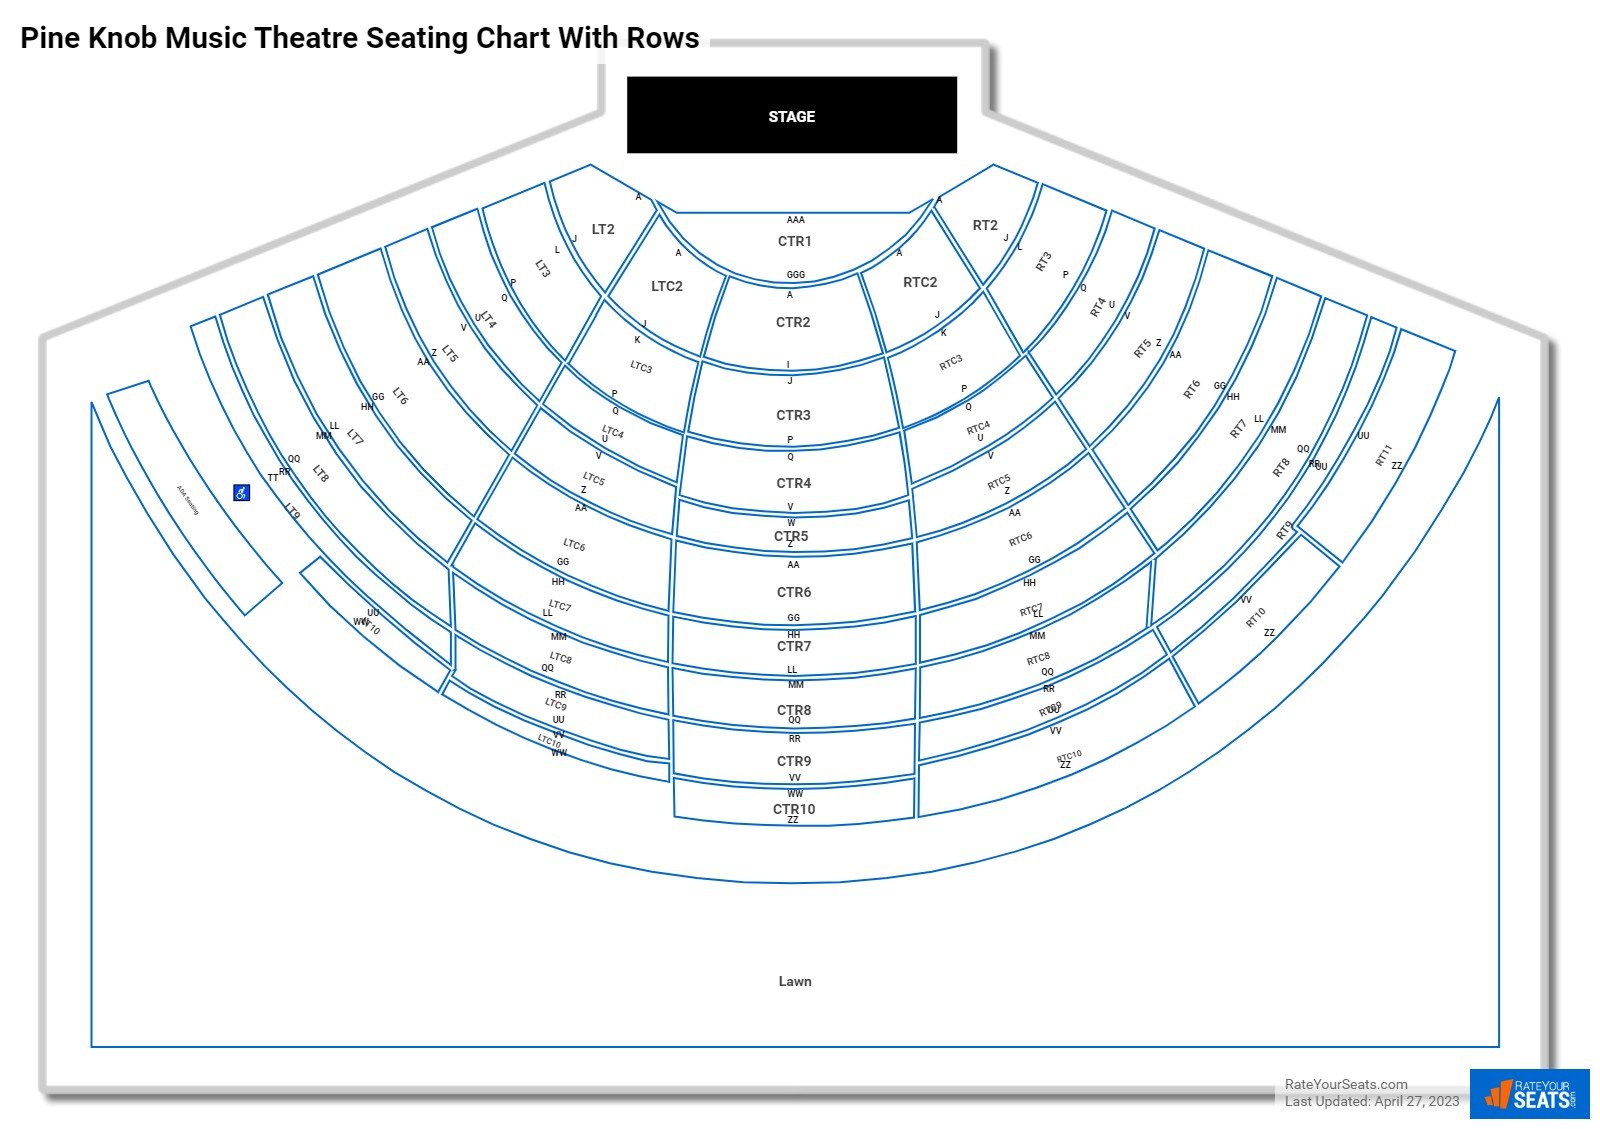 Pine Knob Music Theatre seating chart with row numbers